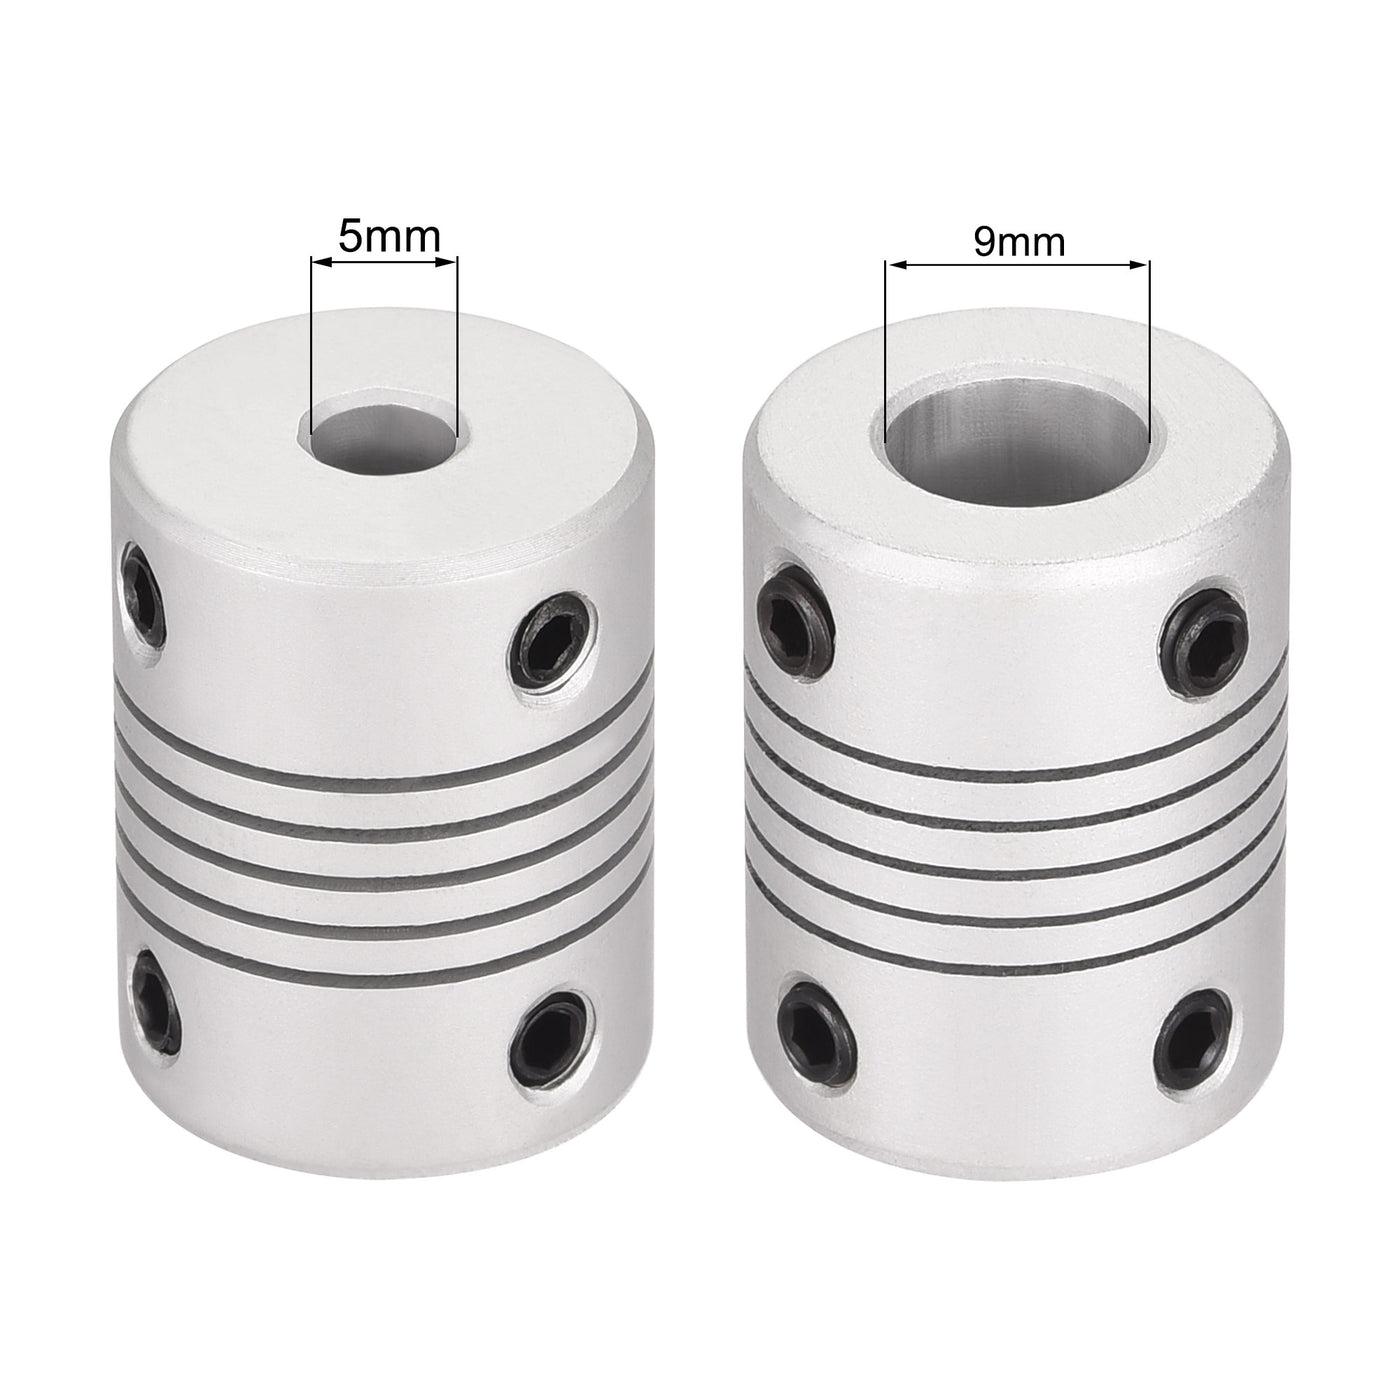 uxcell Uxcell 5mm to 9mm Aluminum Alloy Shaft Coupling Flexible Coupler L25xD19 Silver,2pcs